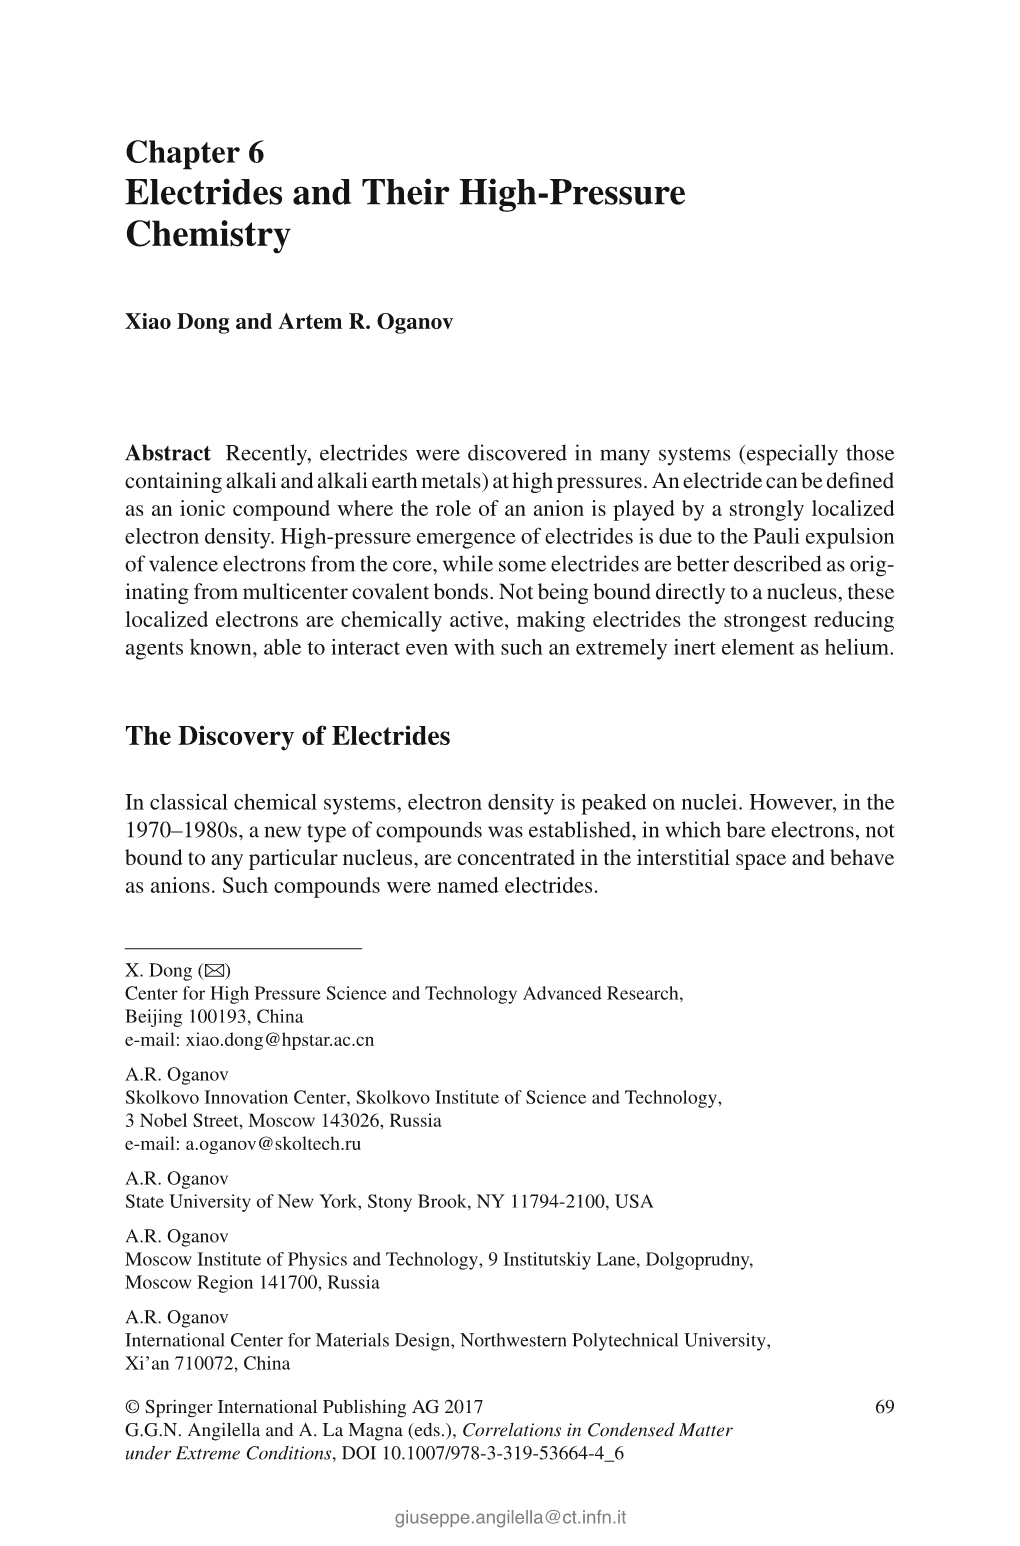 Chapter 6 Electrides and Their High-Pressure Chemistry